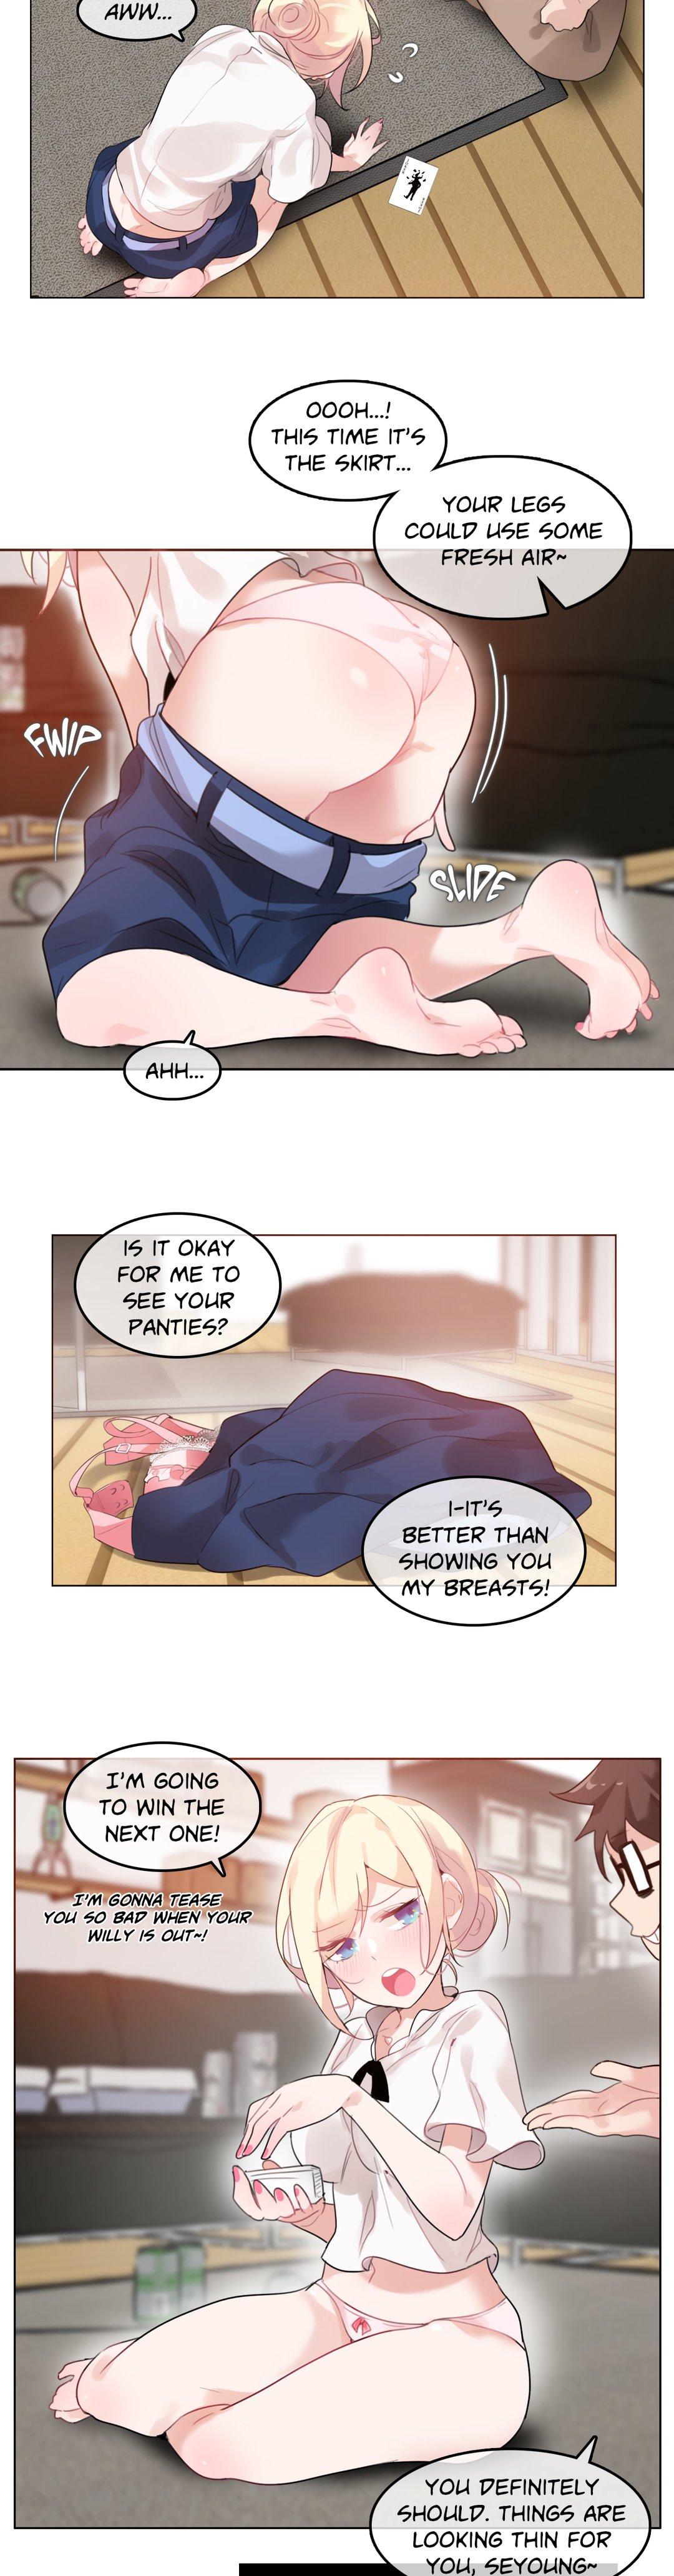 A Pervert's Daily Life • Chapter 31-35 81